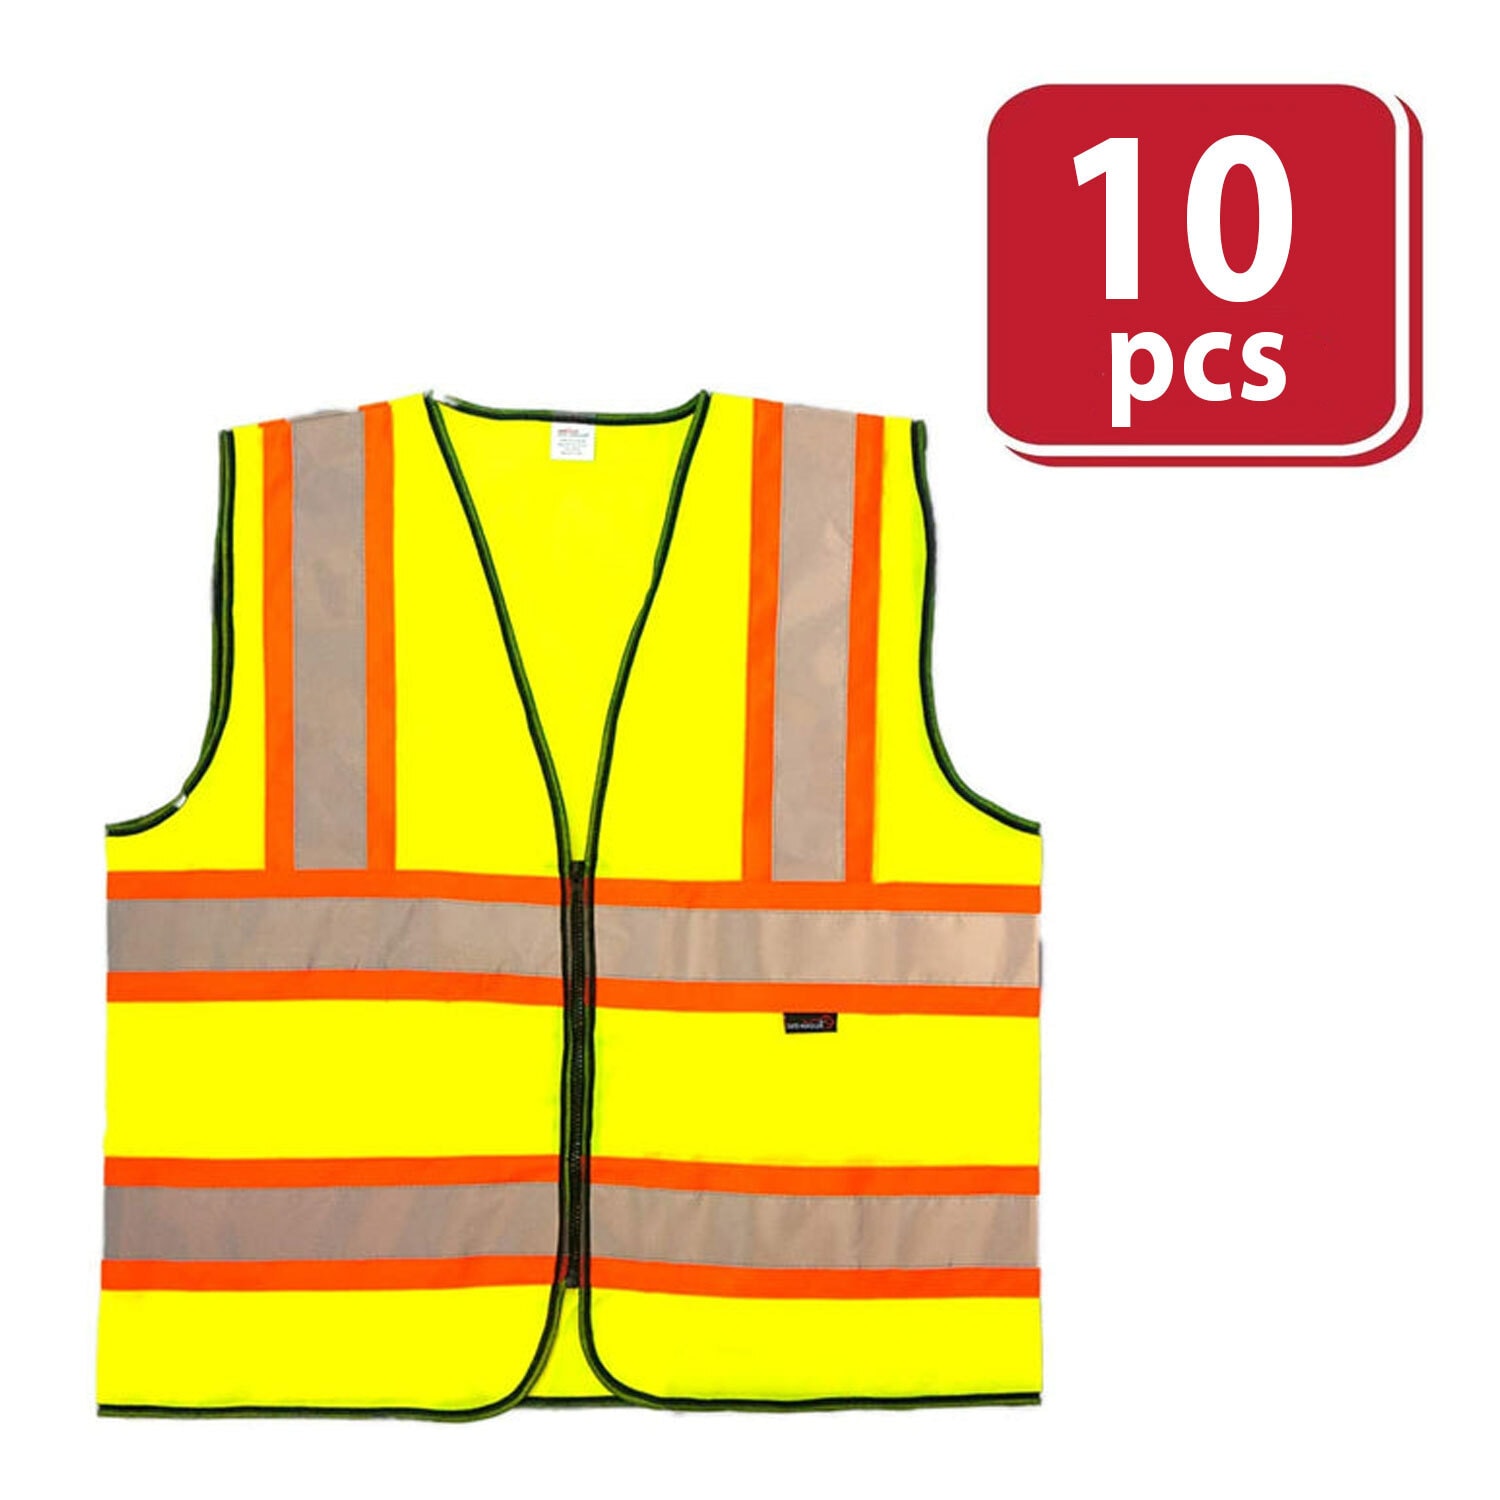 Buy Adult High Visibility Gilet 500 - Neon Yellow Online